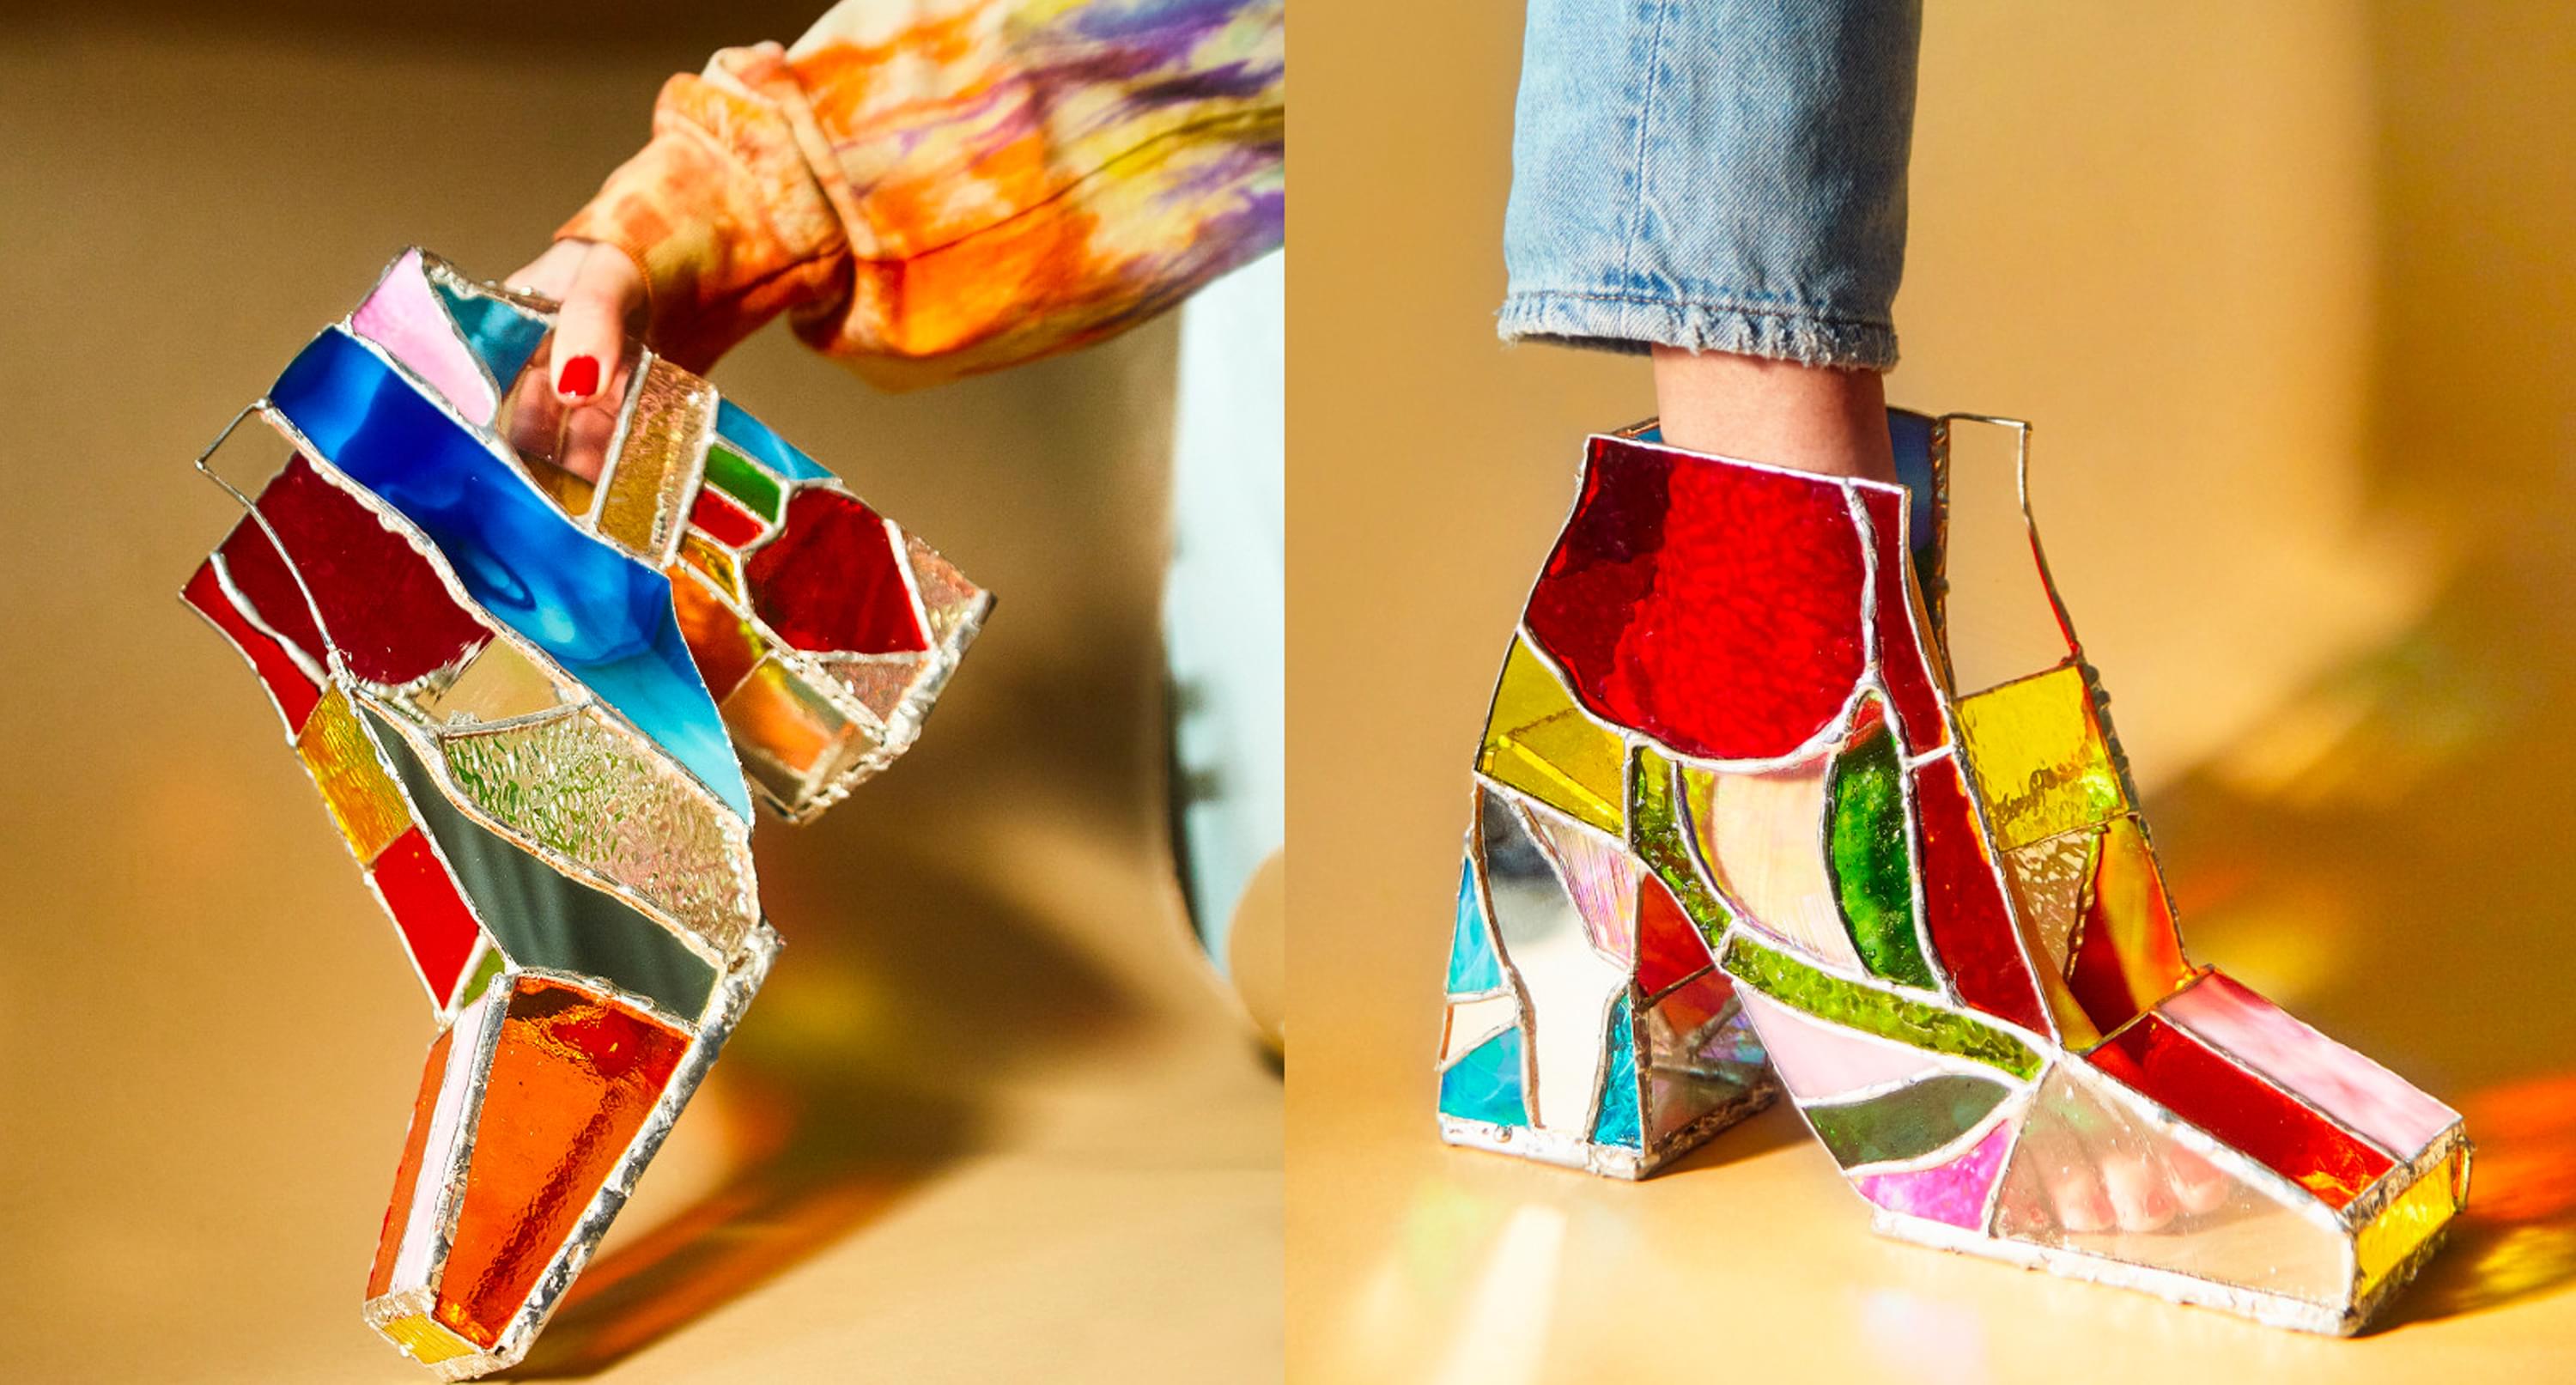 Annu Kilpelainen | Stained Glass Show